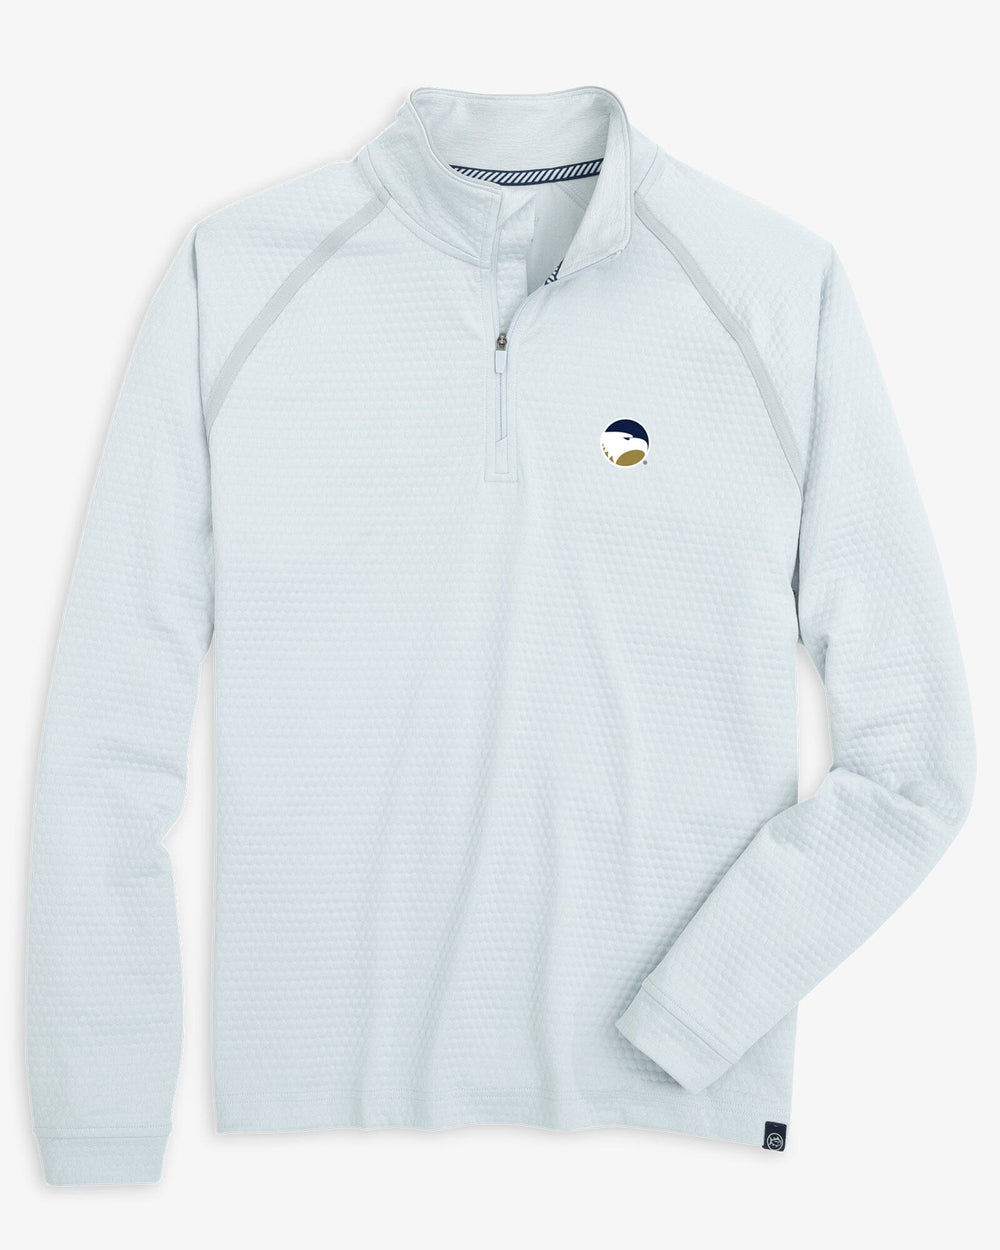 The front view of the Georgia Southern Eagles Scuttle Heather Quarter Zip by Southern Tide - Heather Slate Grey